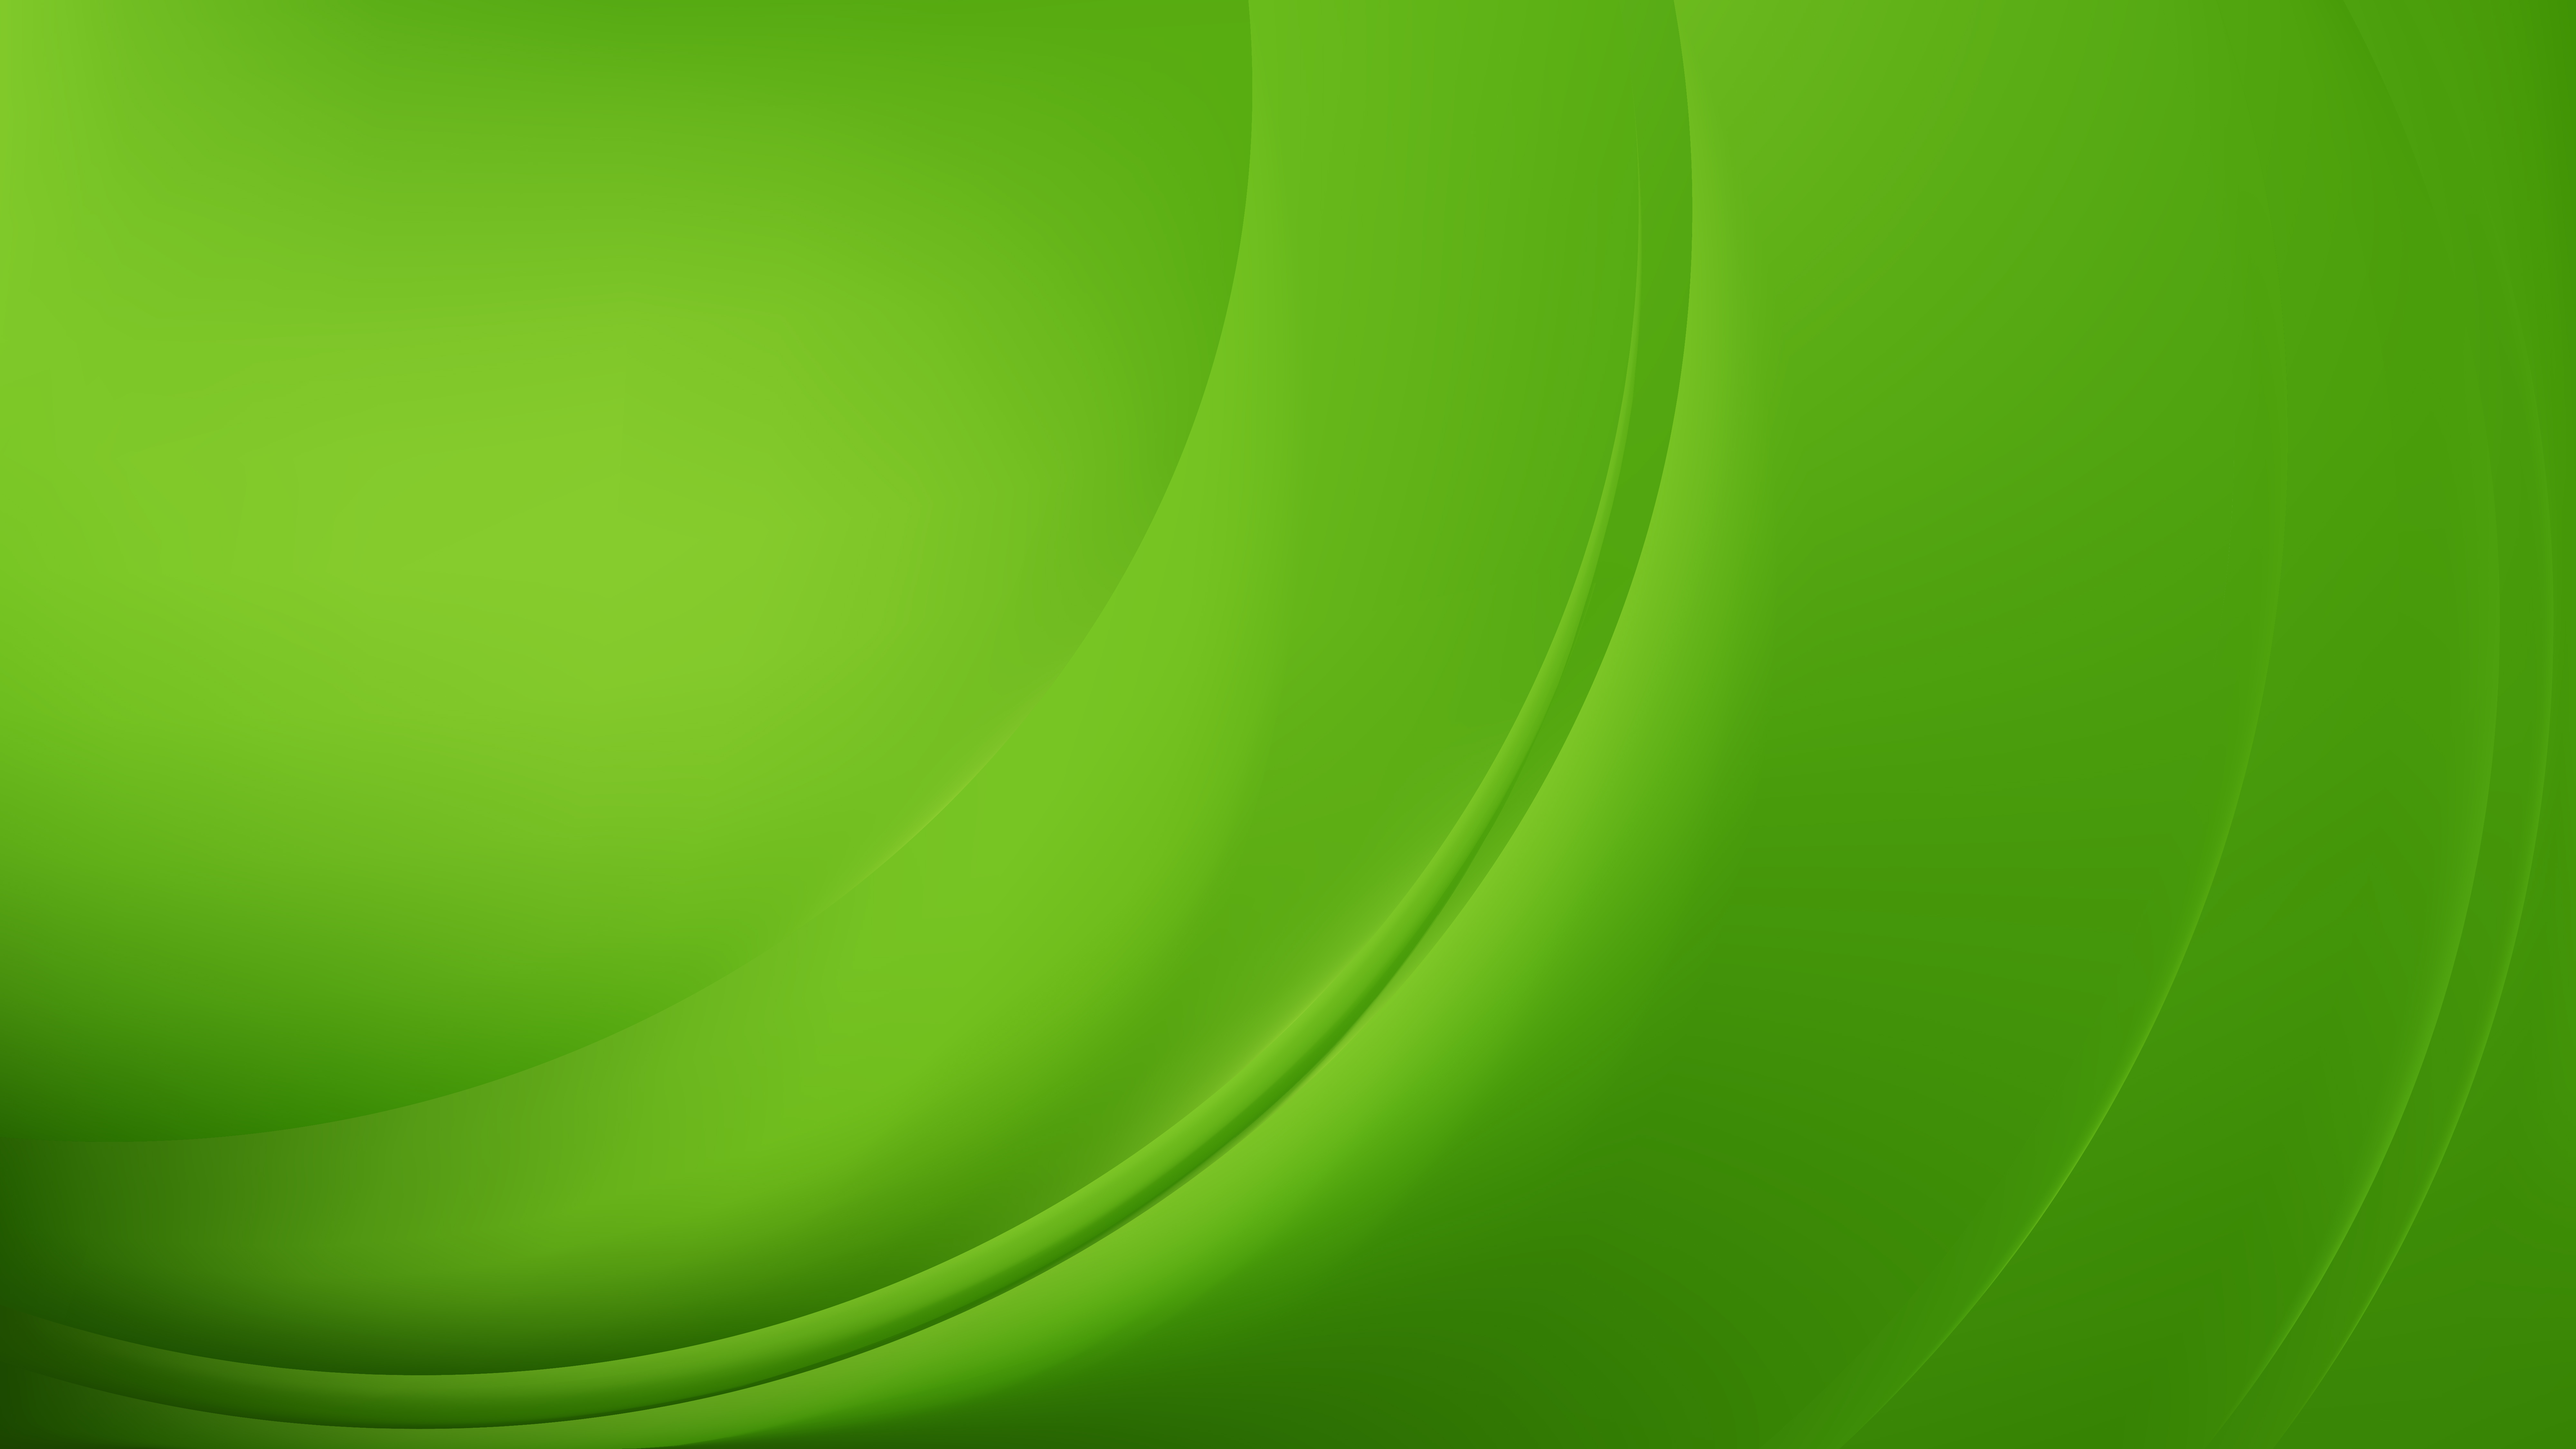 Free Green Abstract Wavy Background Vector